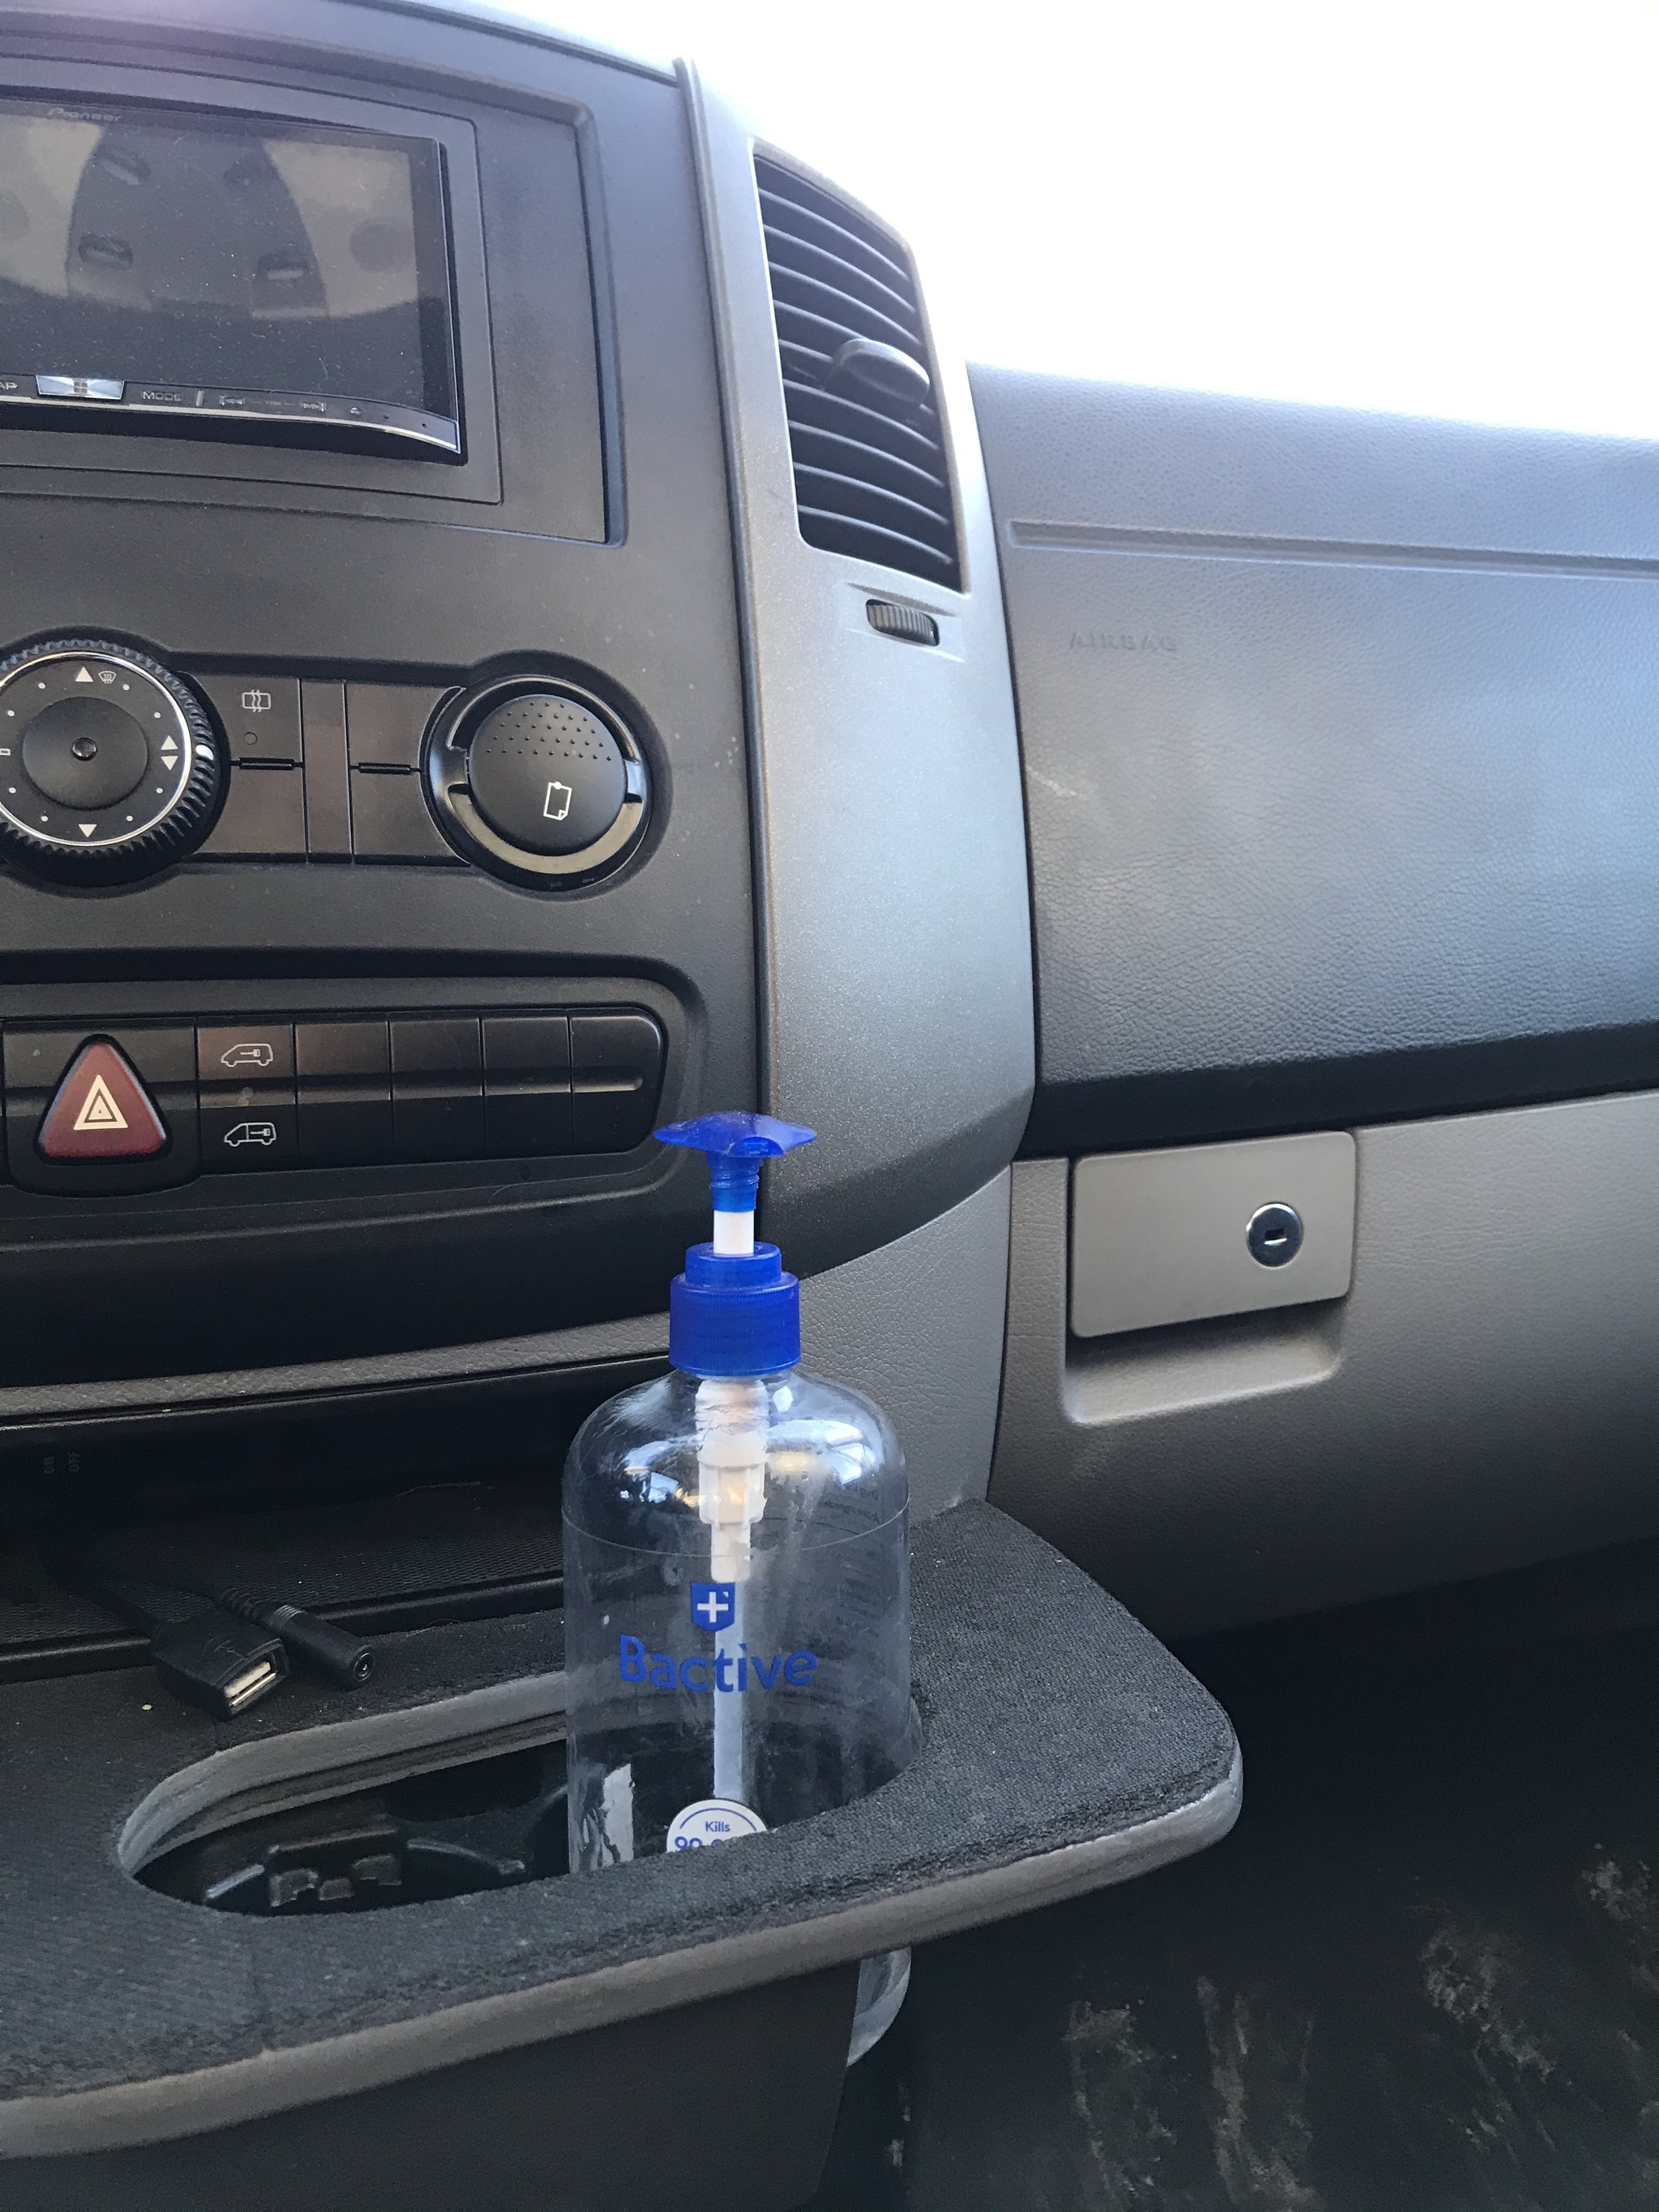 Van console with hand sanitizer